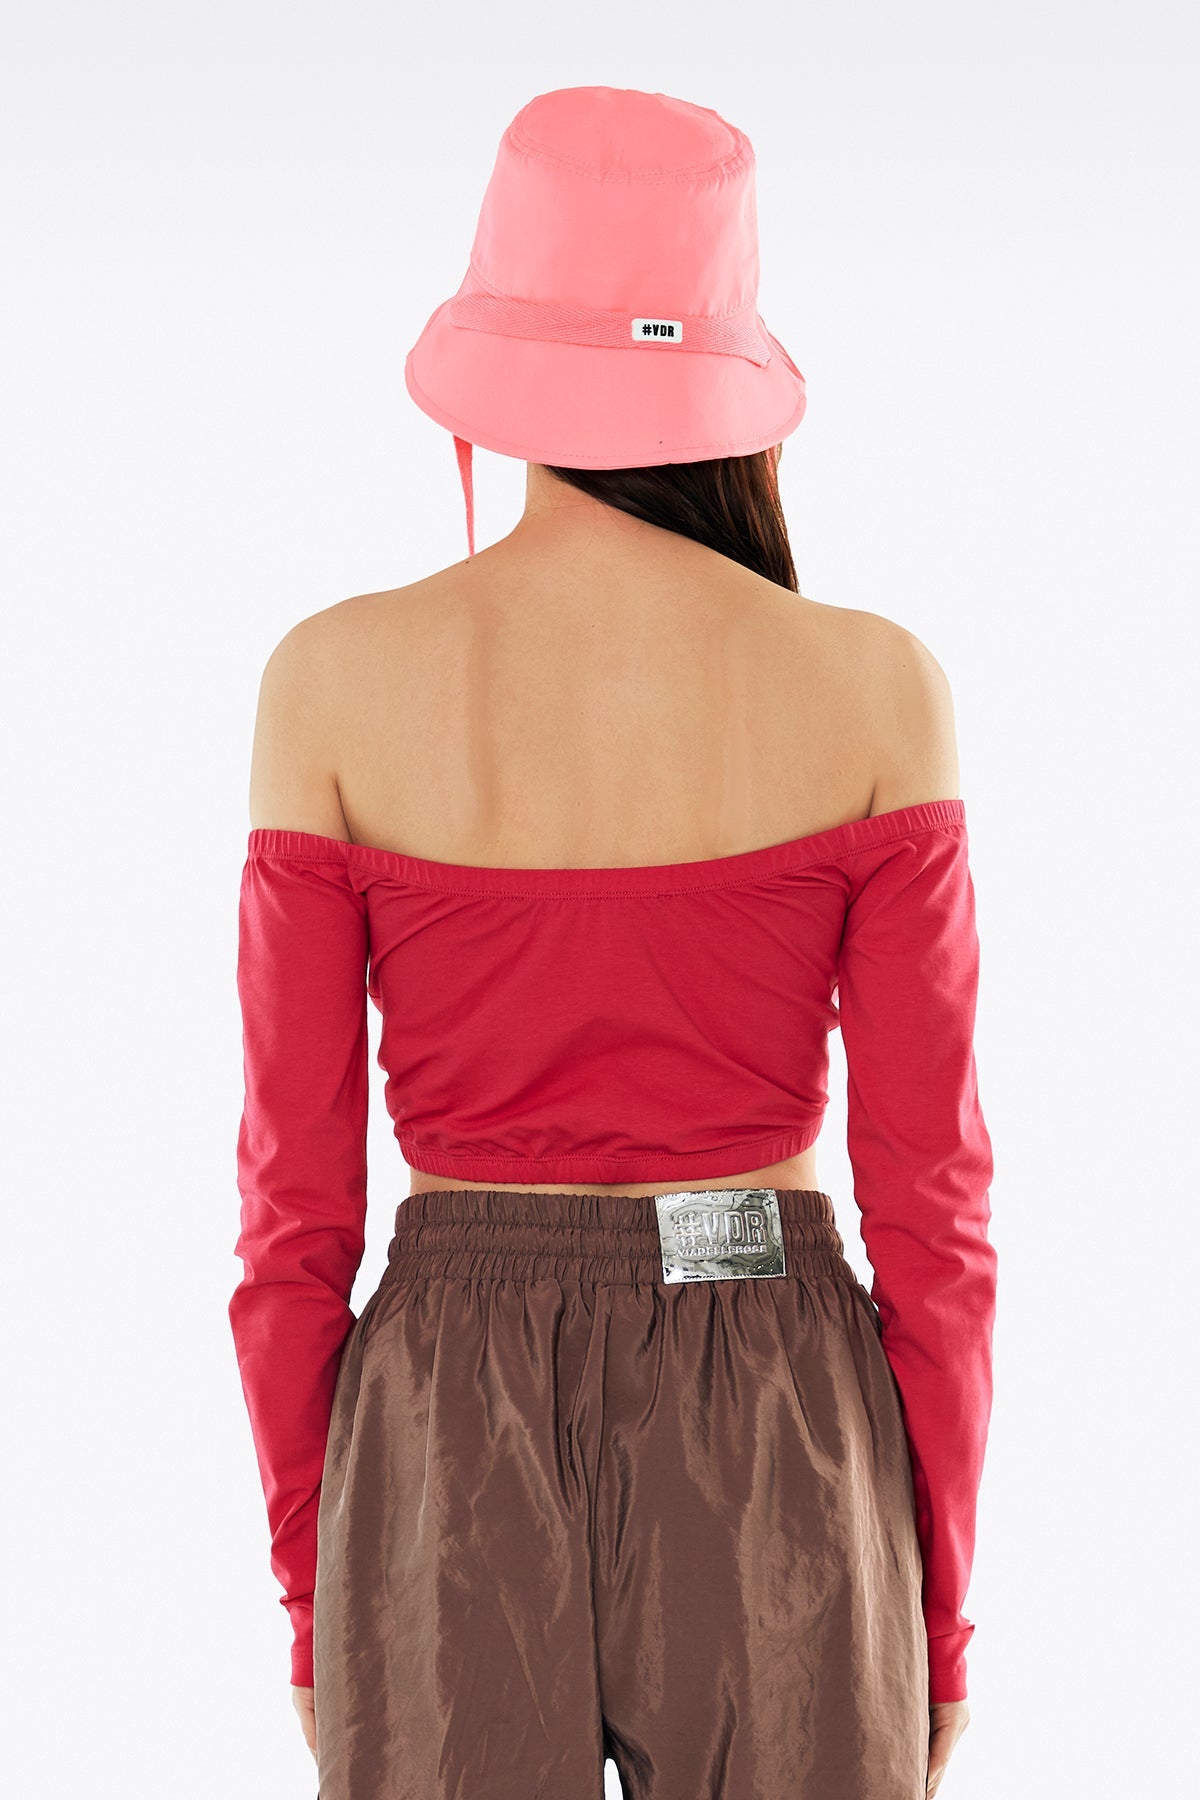 Pink Neon Hat Dolly